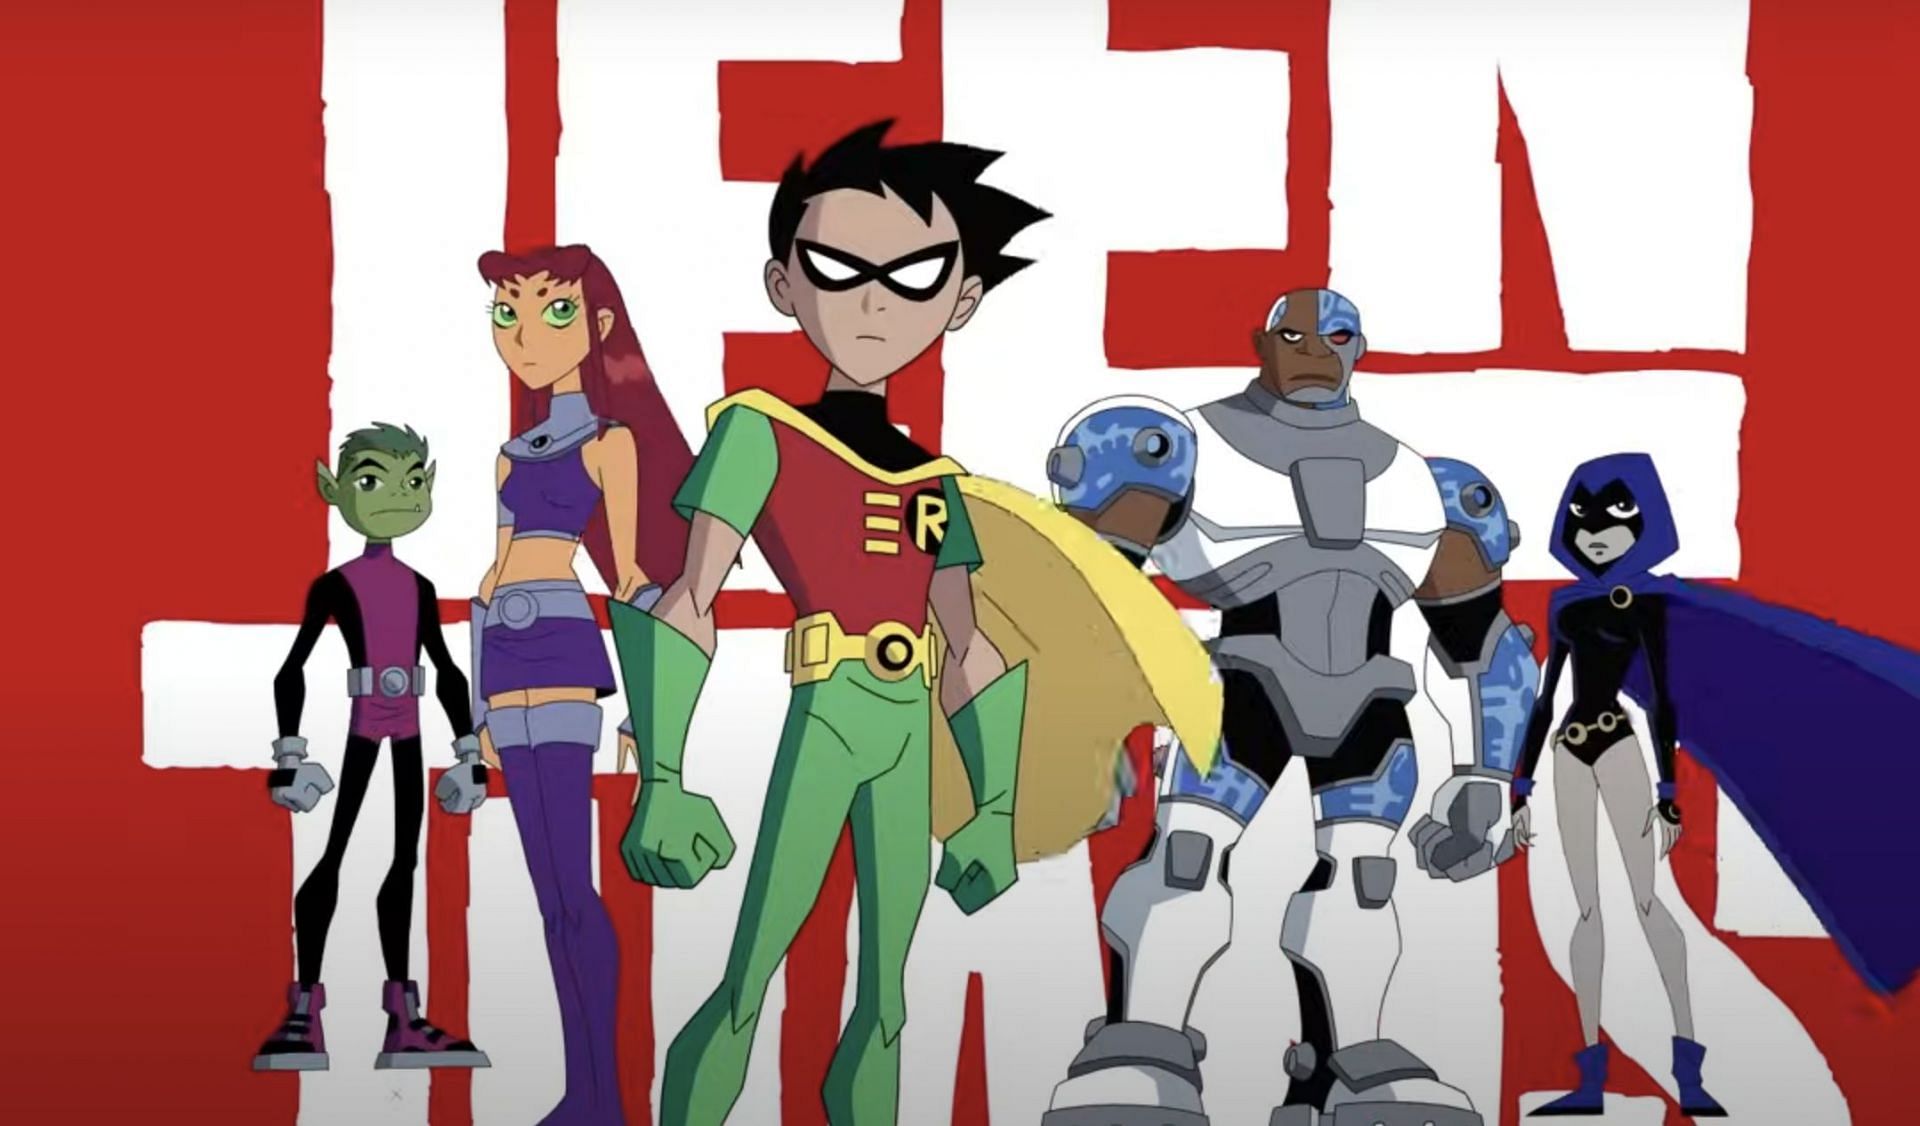 Teen Titans animated series(Image via Official Cartoon Network Youtube channel)